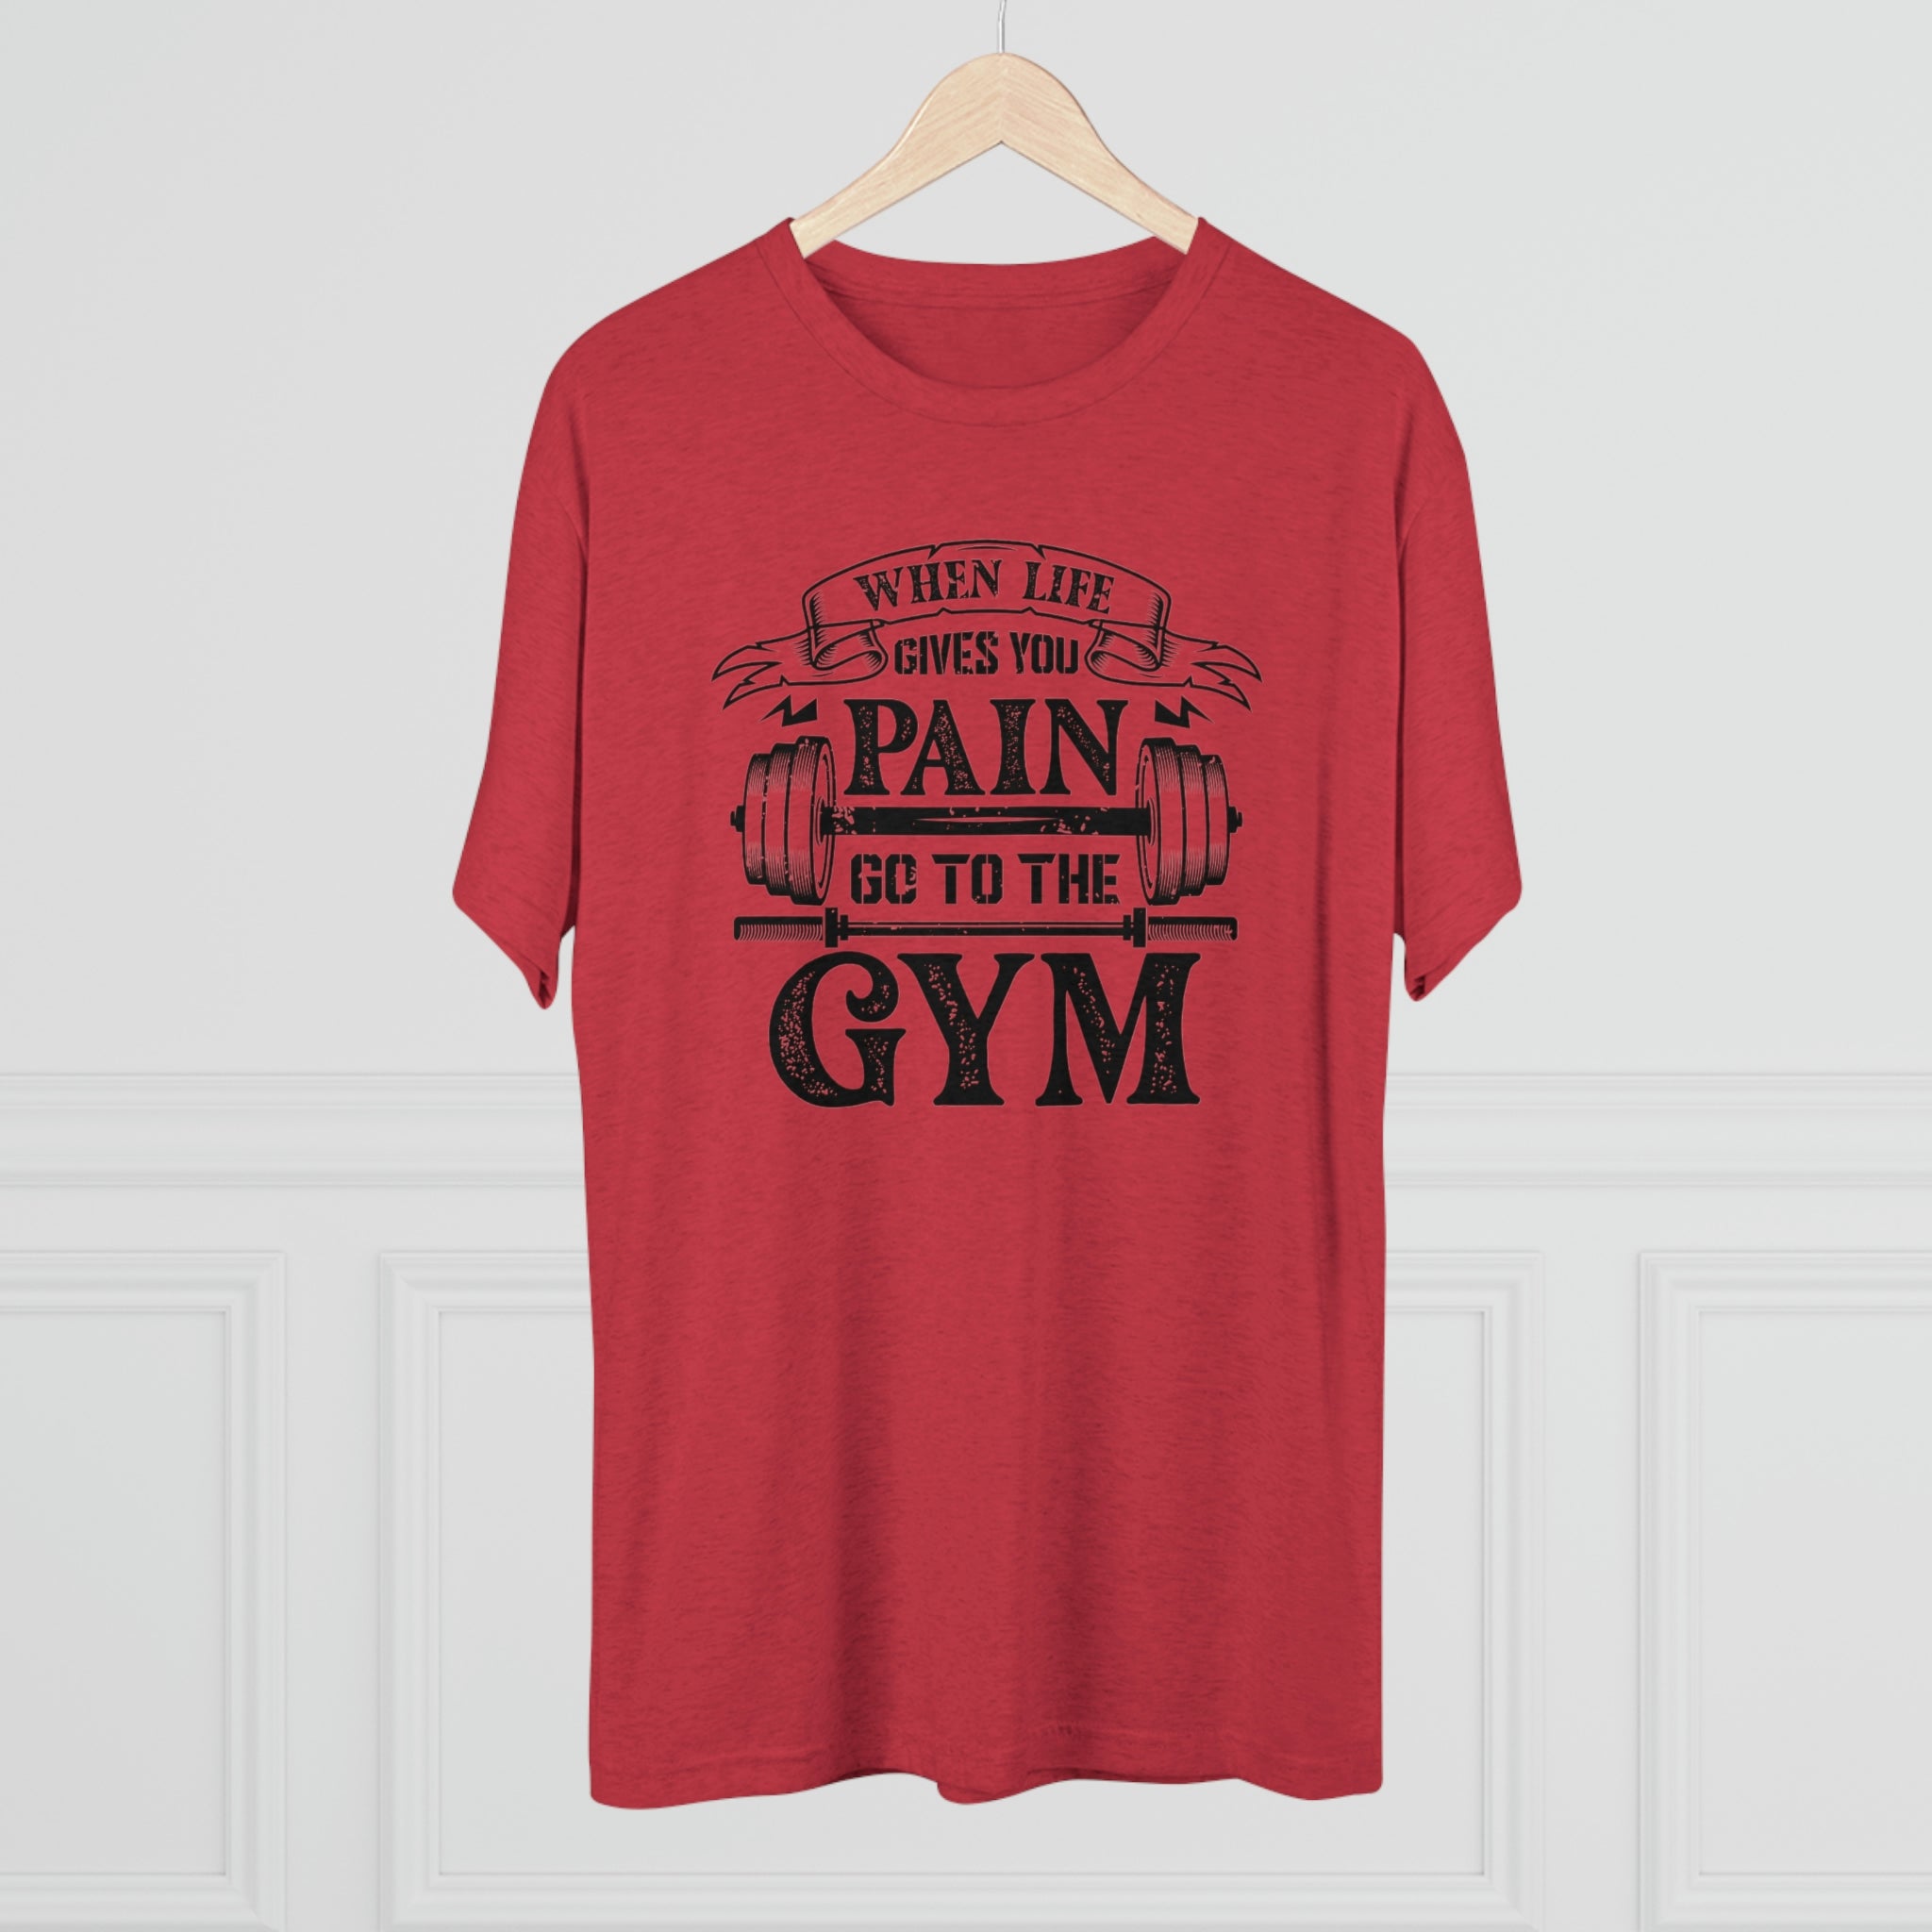 When Life Gives You Pain Go to the Gym